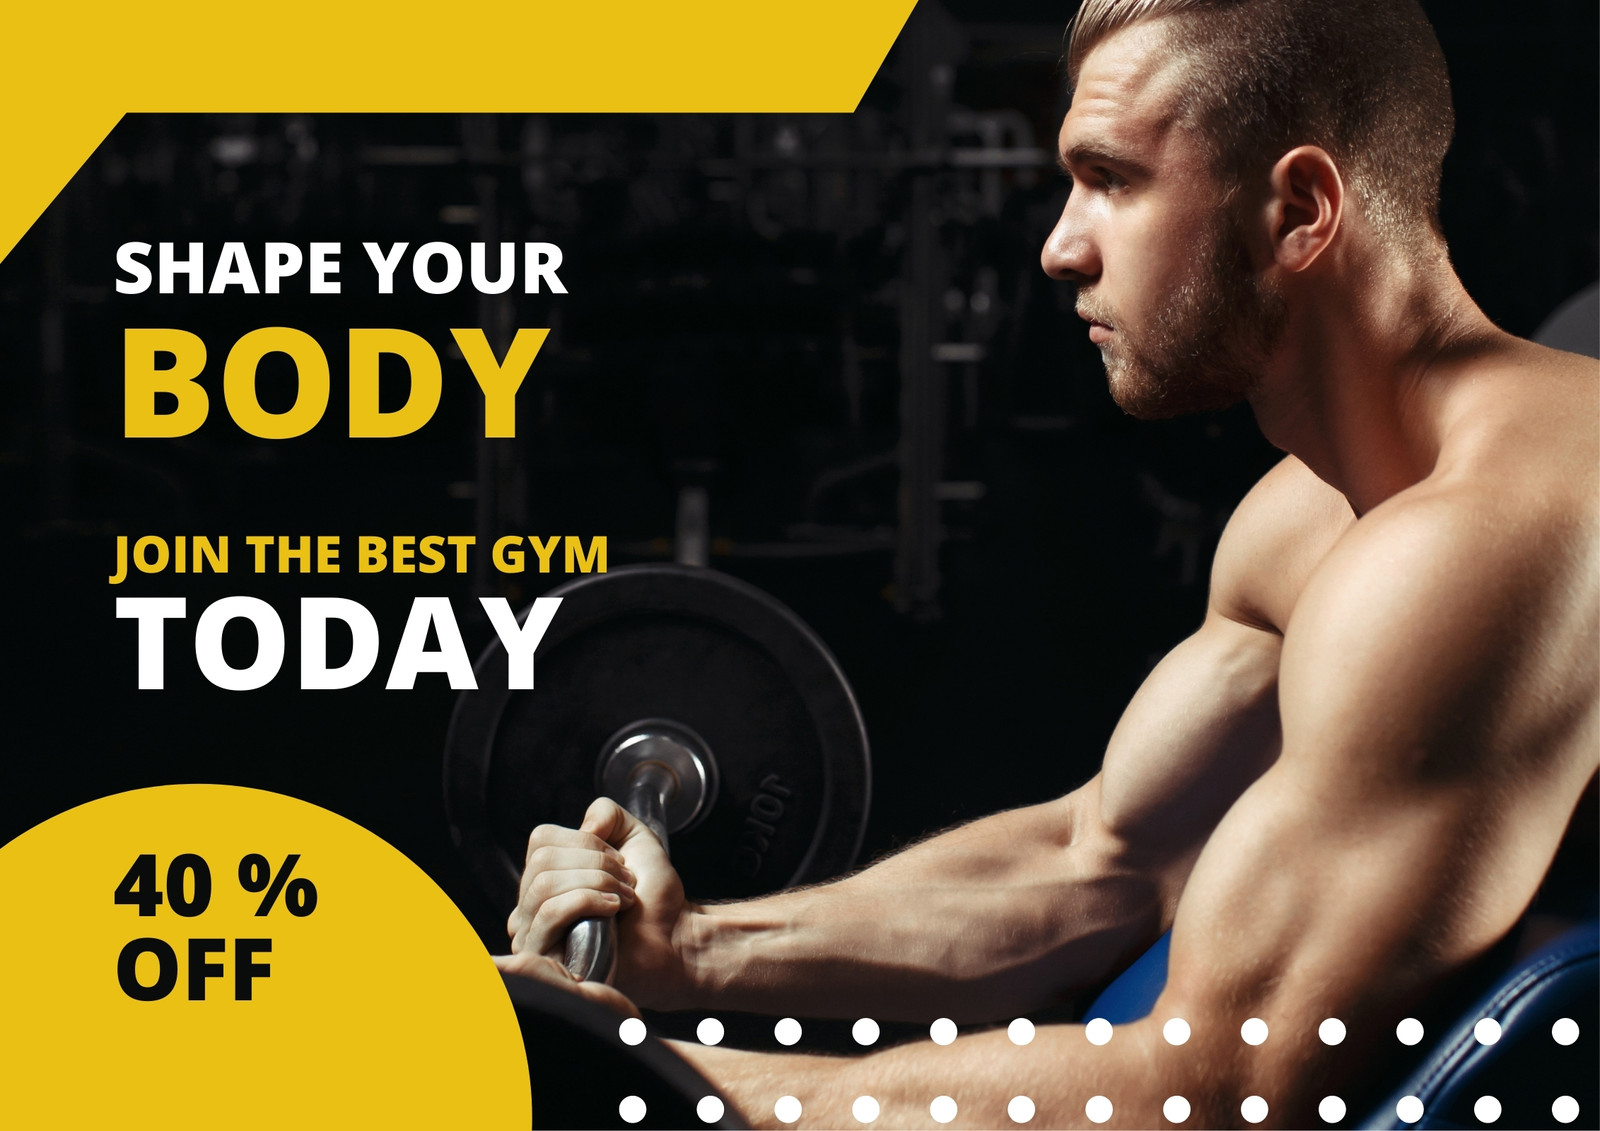 Shape your body, Let's Join the best gym today & Get the Best